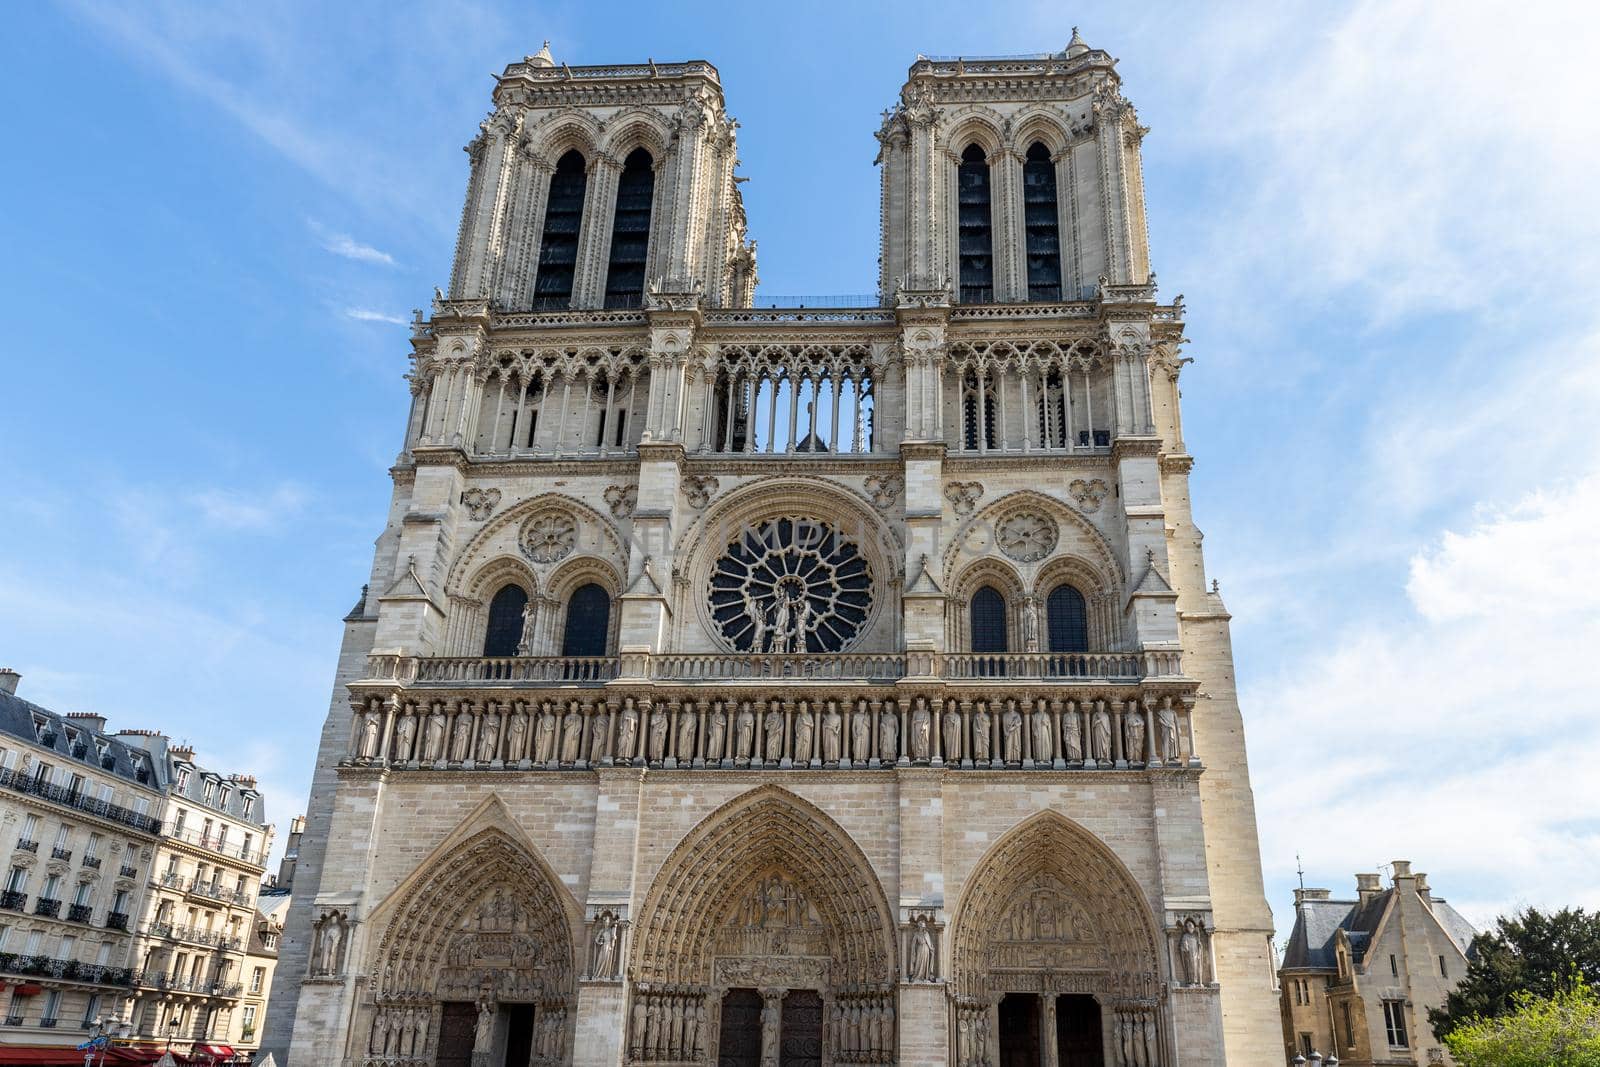 The front with two main towers of cathedral Notre Dame, Paris, France